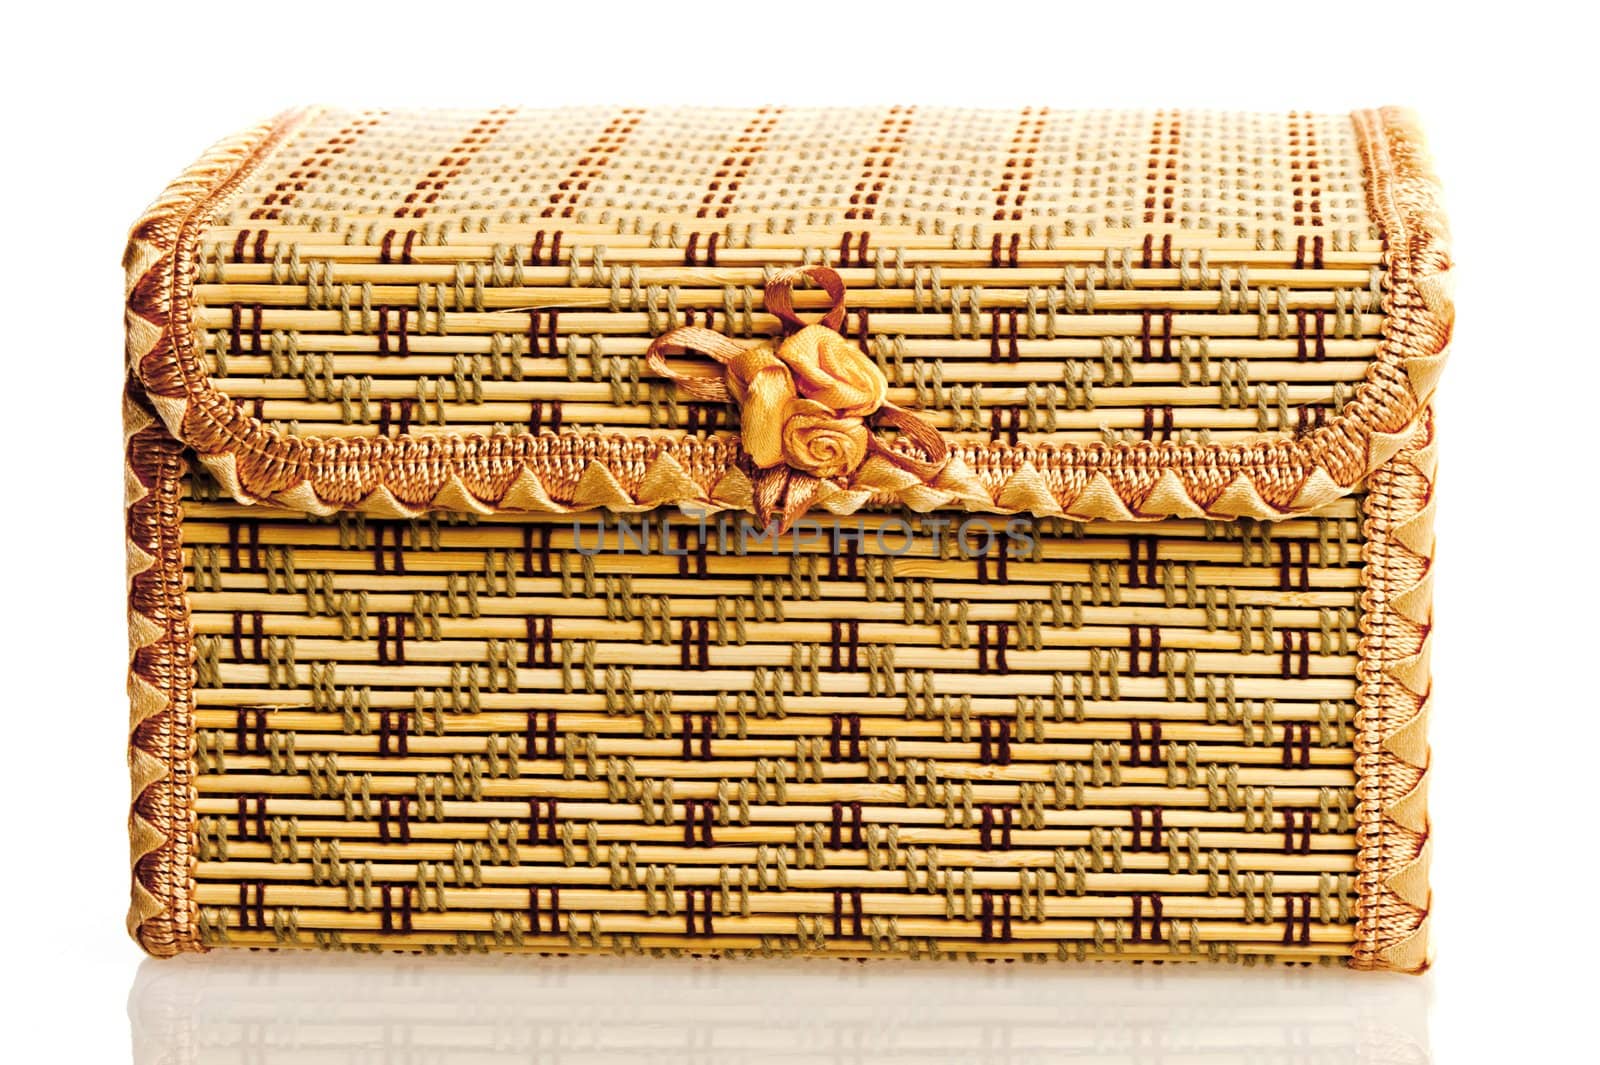 Yellow wicker box for needlework on a white background. by kosmsos111